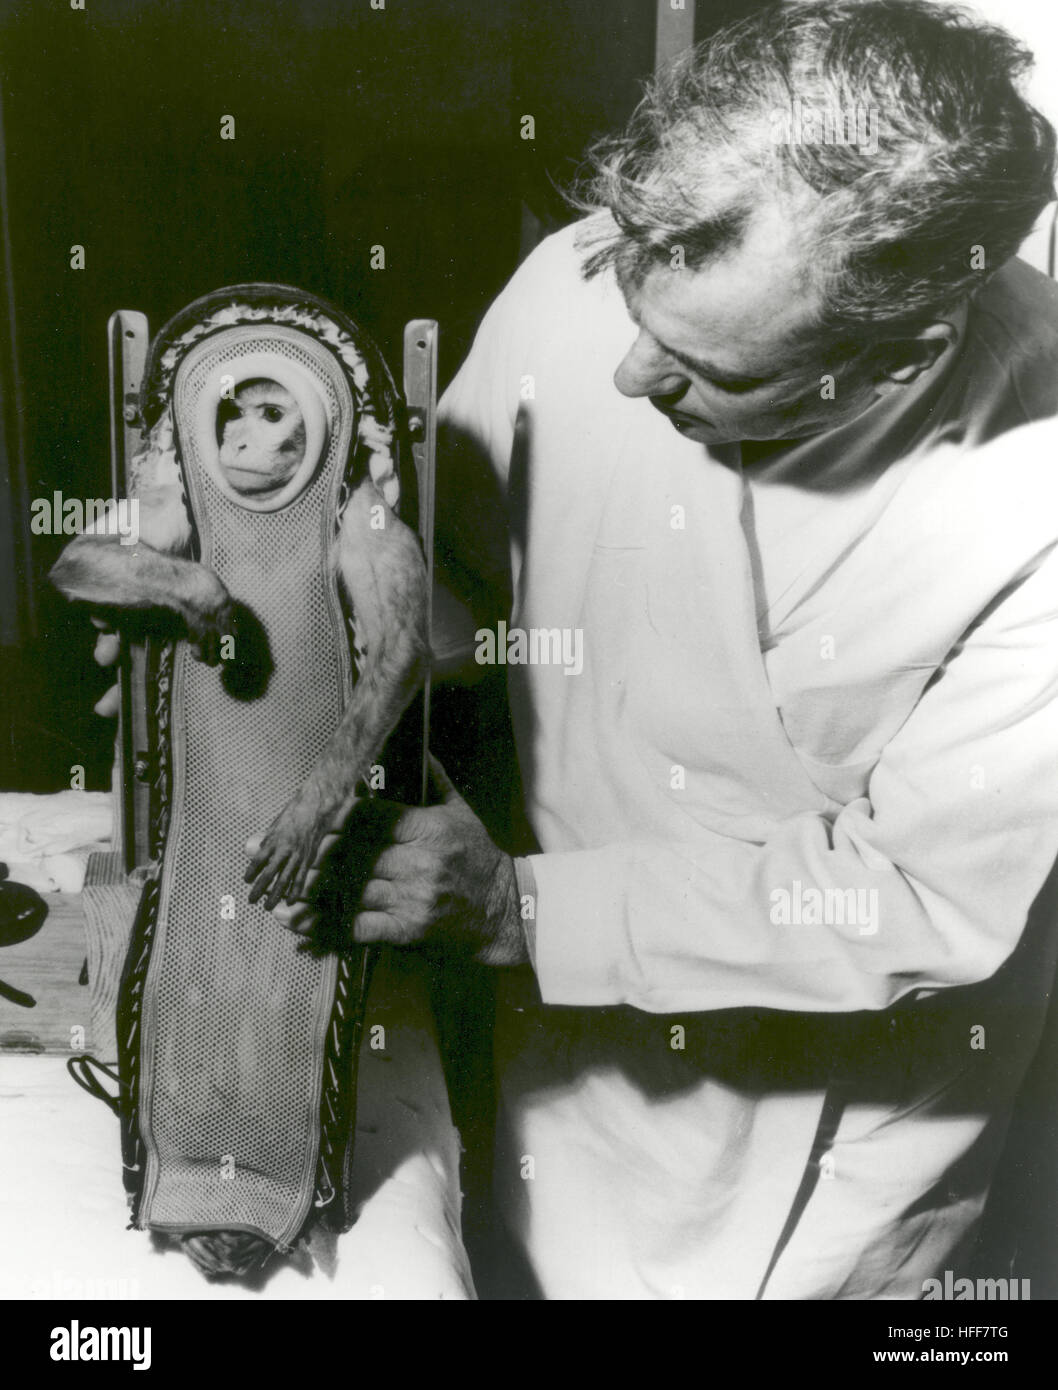 Sam, the Rhesus monkey, after his ride in the Little Joe-2 (LJ-2) spacecraft. A U.S. Navy destroyer safely recovered Sam after he experienced three minutes of weightlessness during the flight. Animals were often used during test flights for Project Mercury to help determine the effects of spaceflight and weightlessness on humans. LJ-2 was one in a series of flights that led up to the human orbital flights of NASA's Project Mercury program. The Little Joe rocket booster was developed as a cheaper, smaller, and more functional alternative to the Redstone rockets. Little Joe could be produced at  Stock Photo